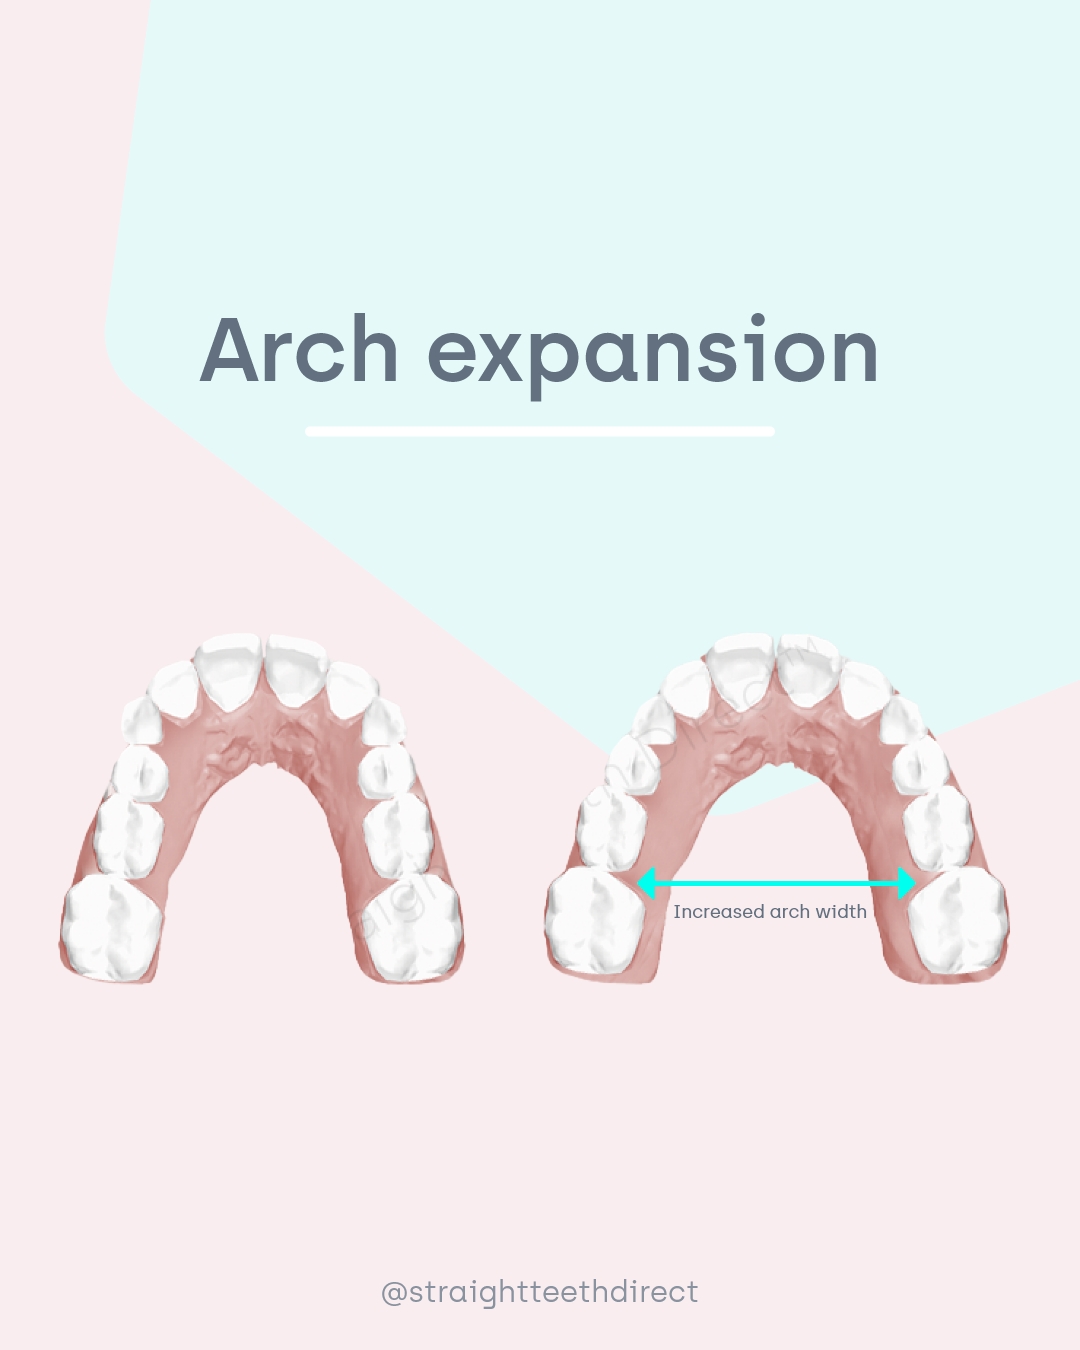 Arch expansion